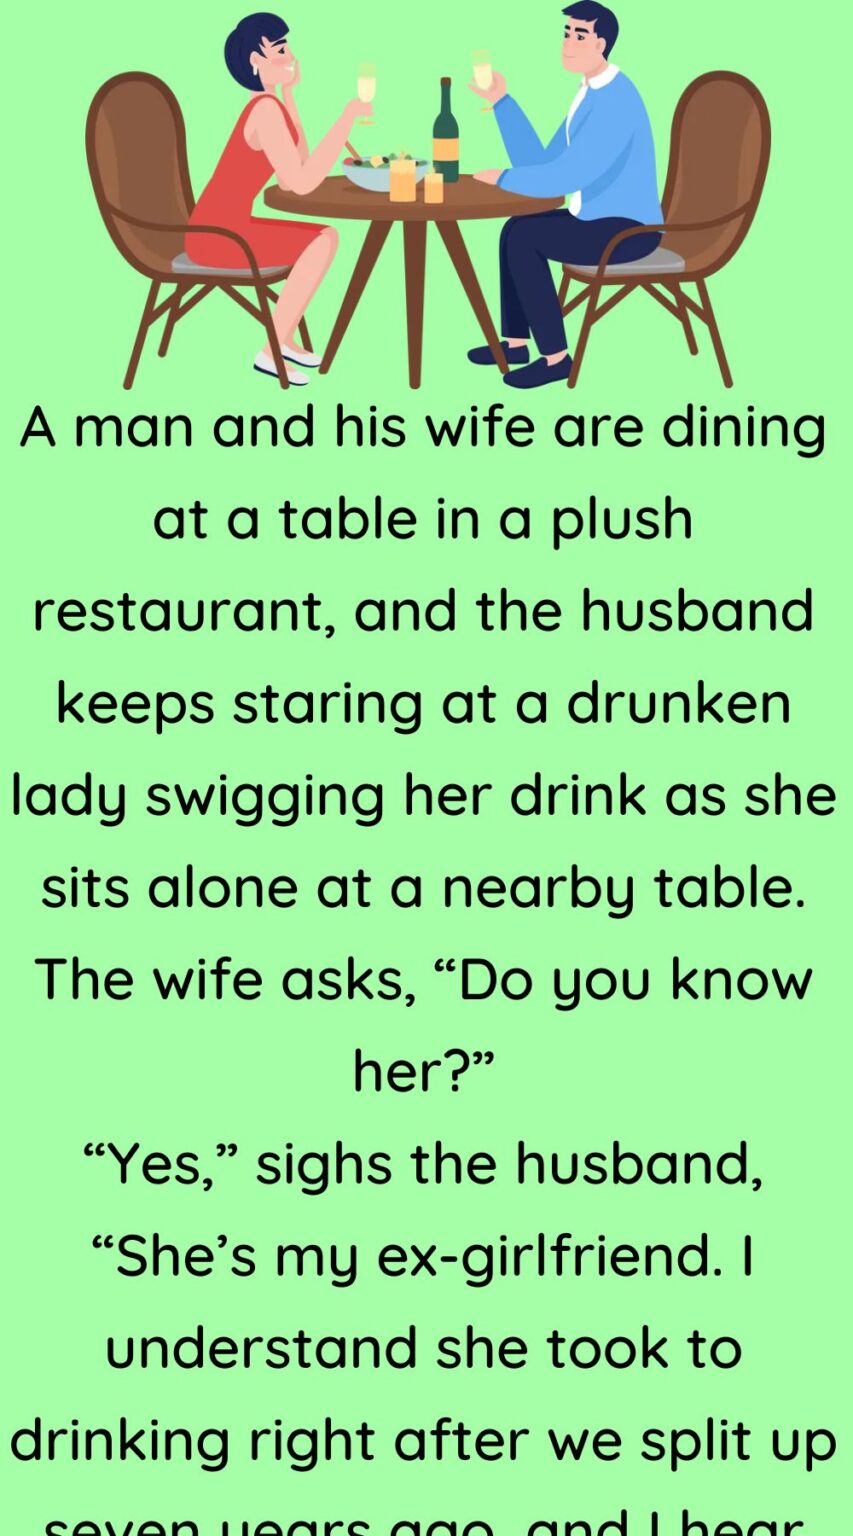 A man and his wife are dining at a table - Funny Jokes and Story - Humors